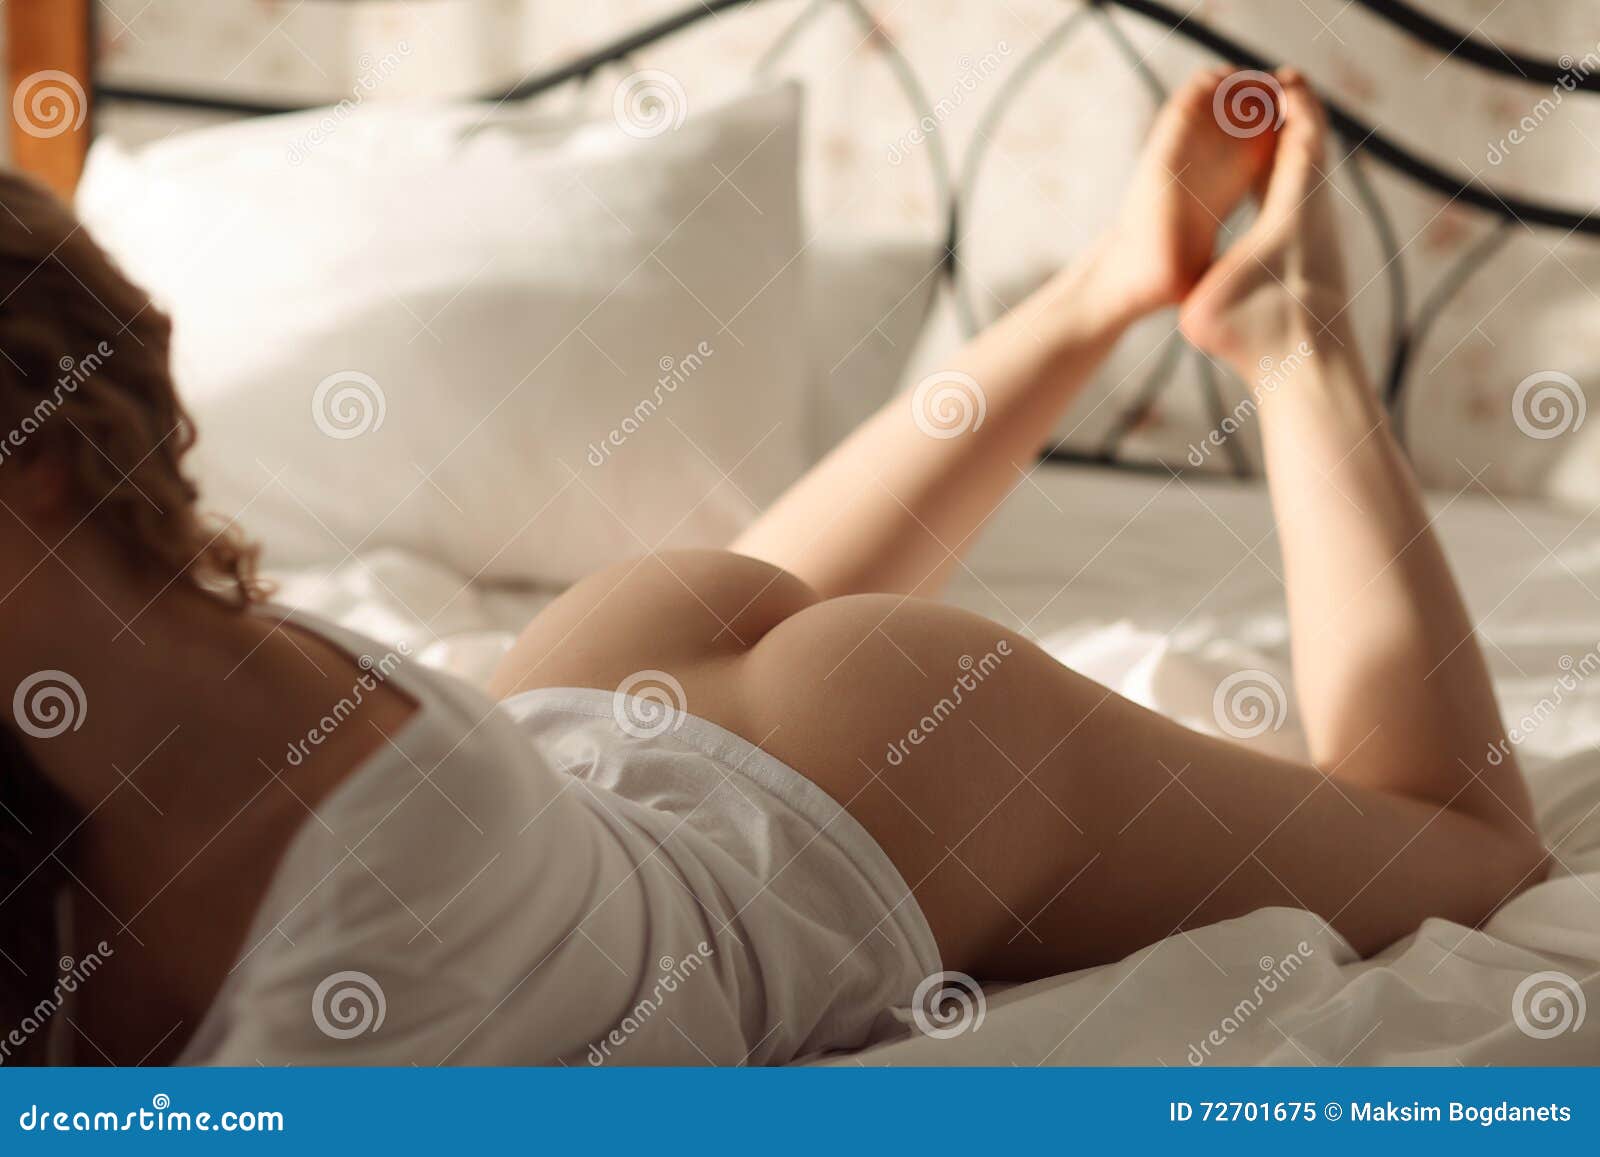 Photo of Sexual Blond Woman Lying Naked in Bed, Relaxing Stock Image pic